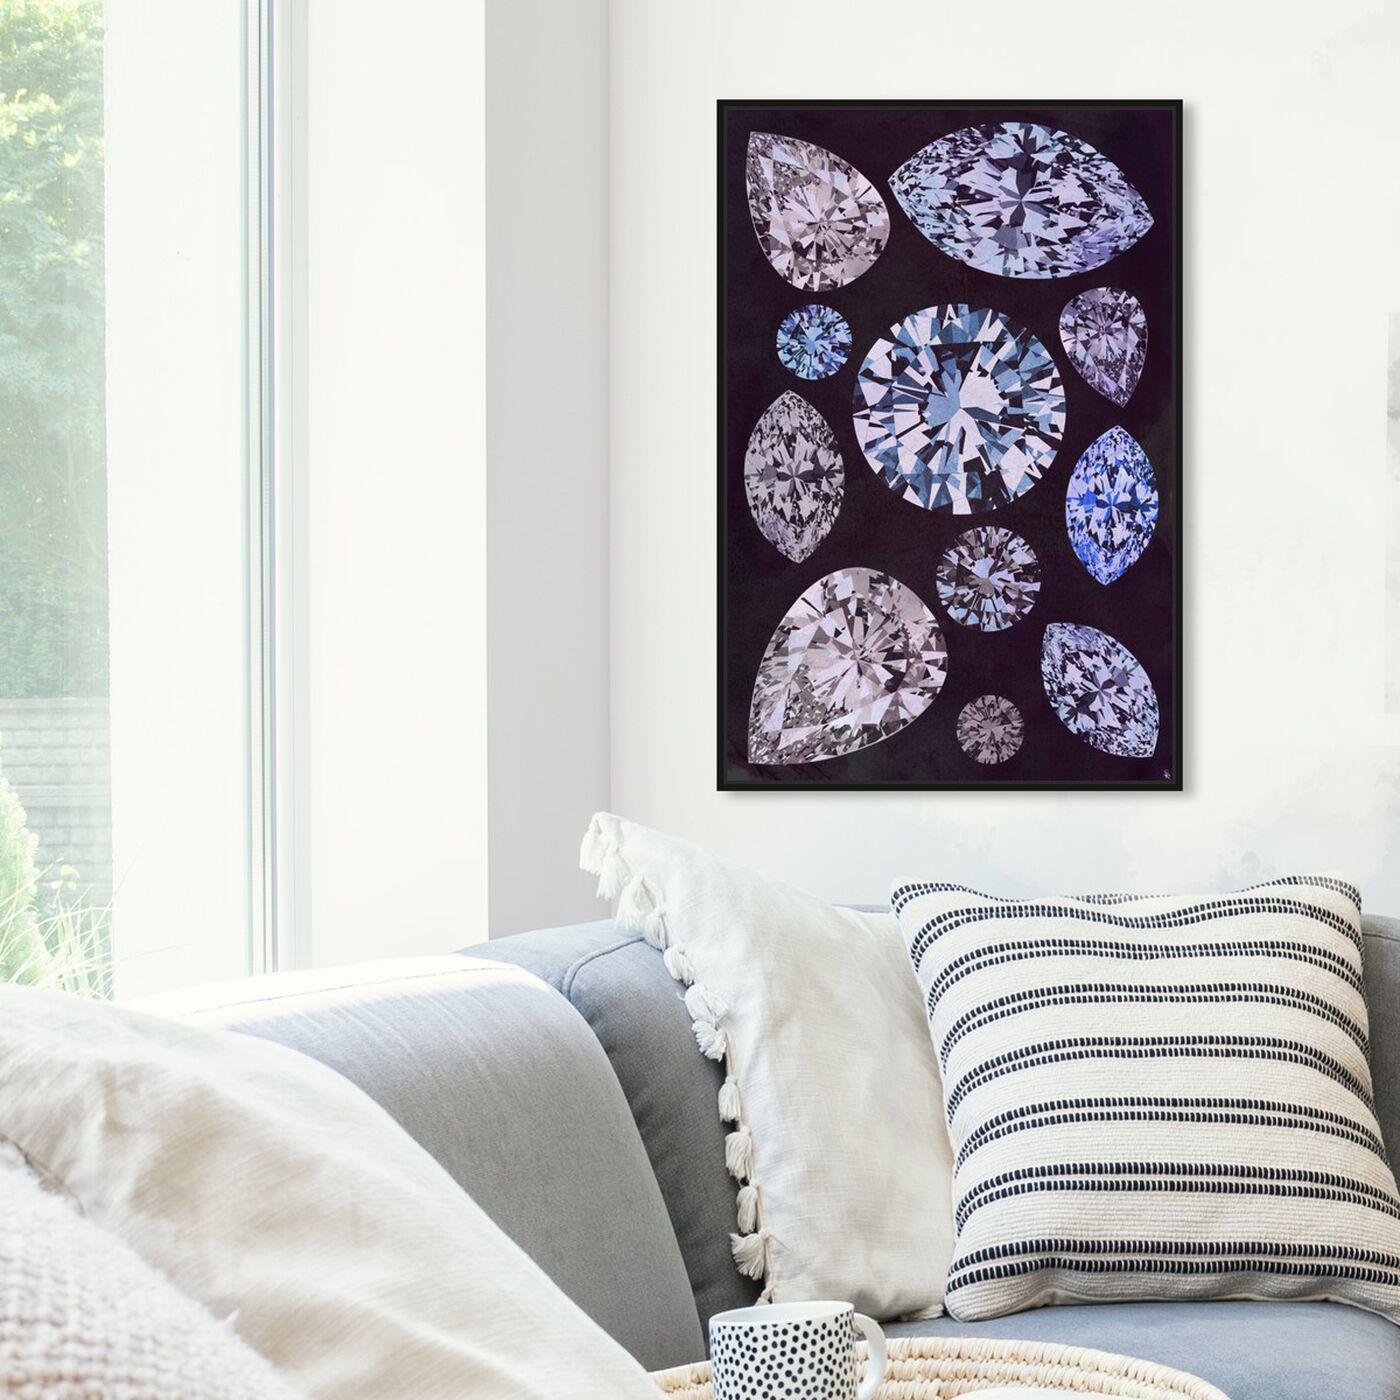 Hanging view of Violet Stones featuring abstract and crystals art.